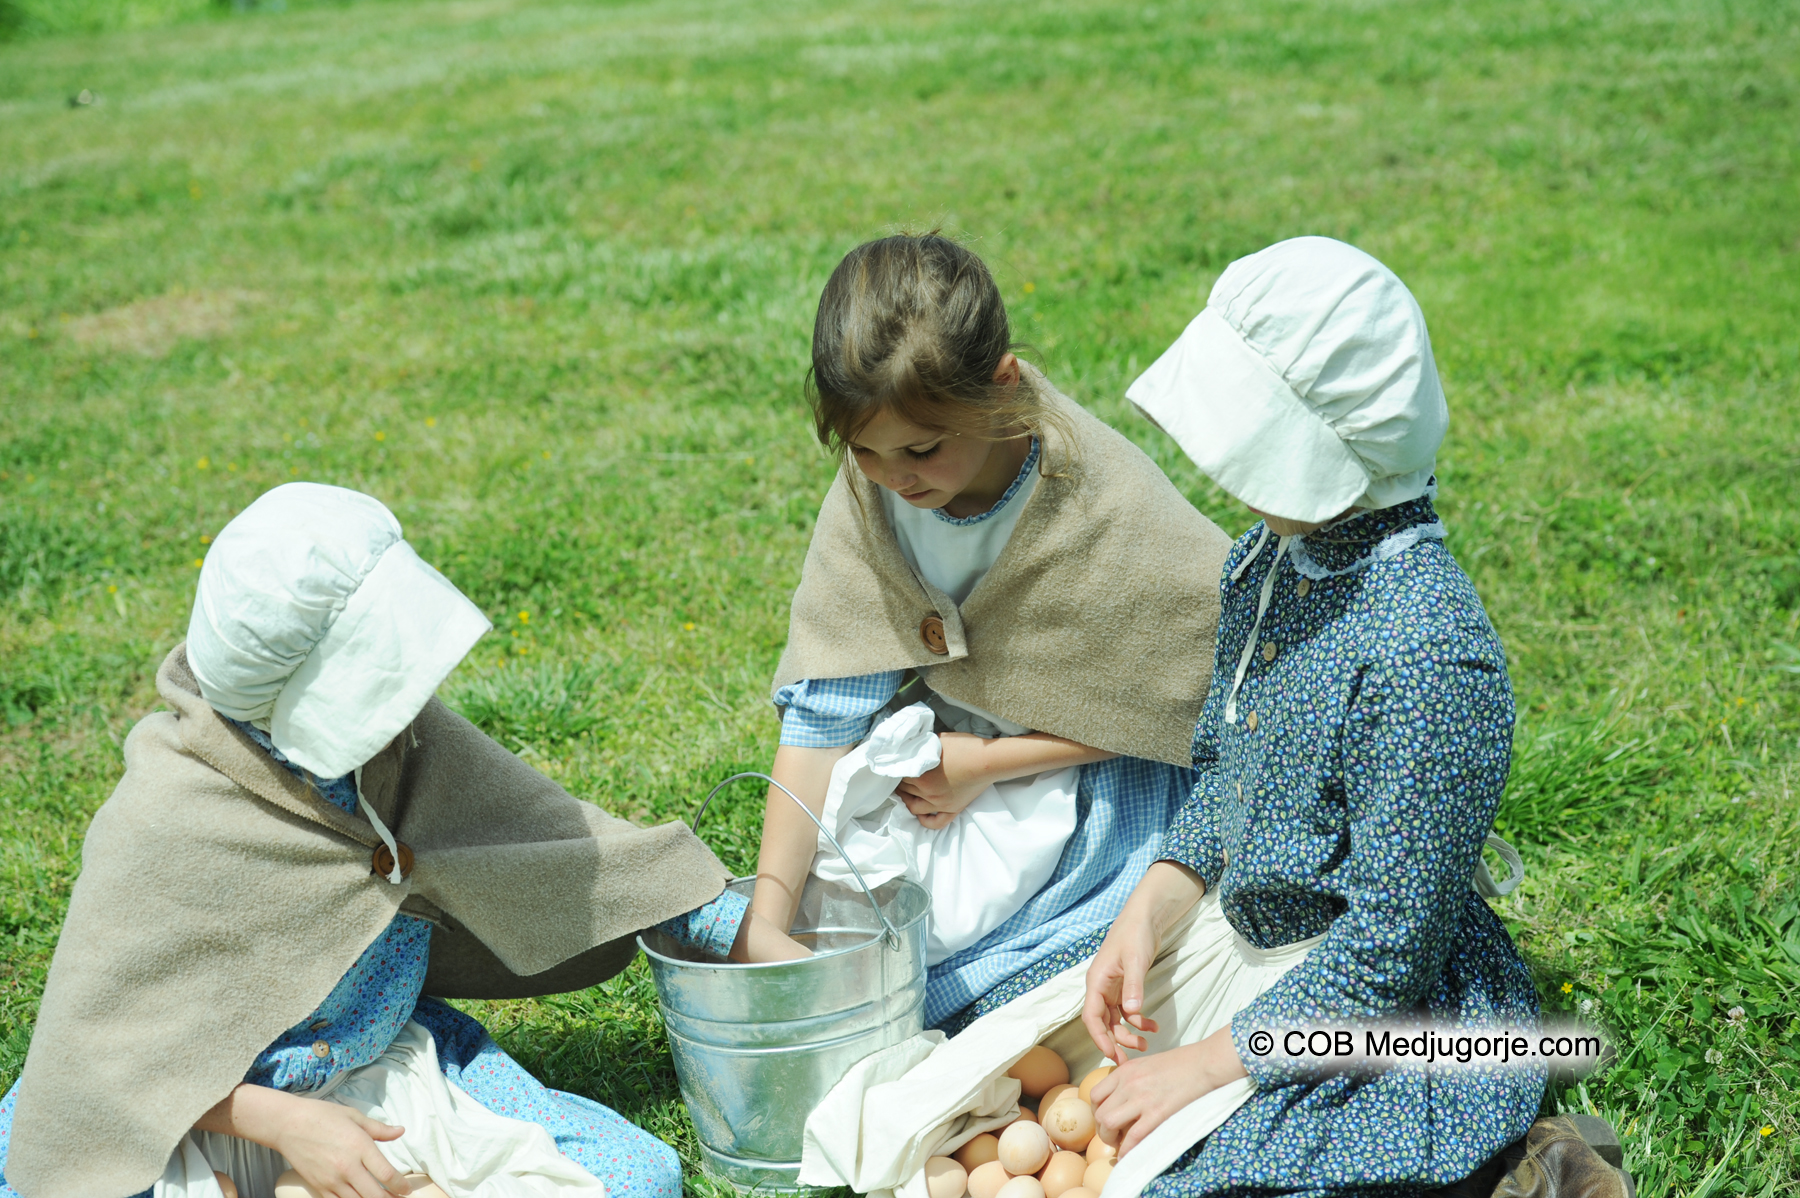 Faith, Victoia, and Angela pick up eggs in their 'old-fashioned' outfits